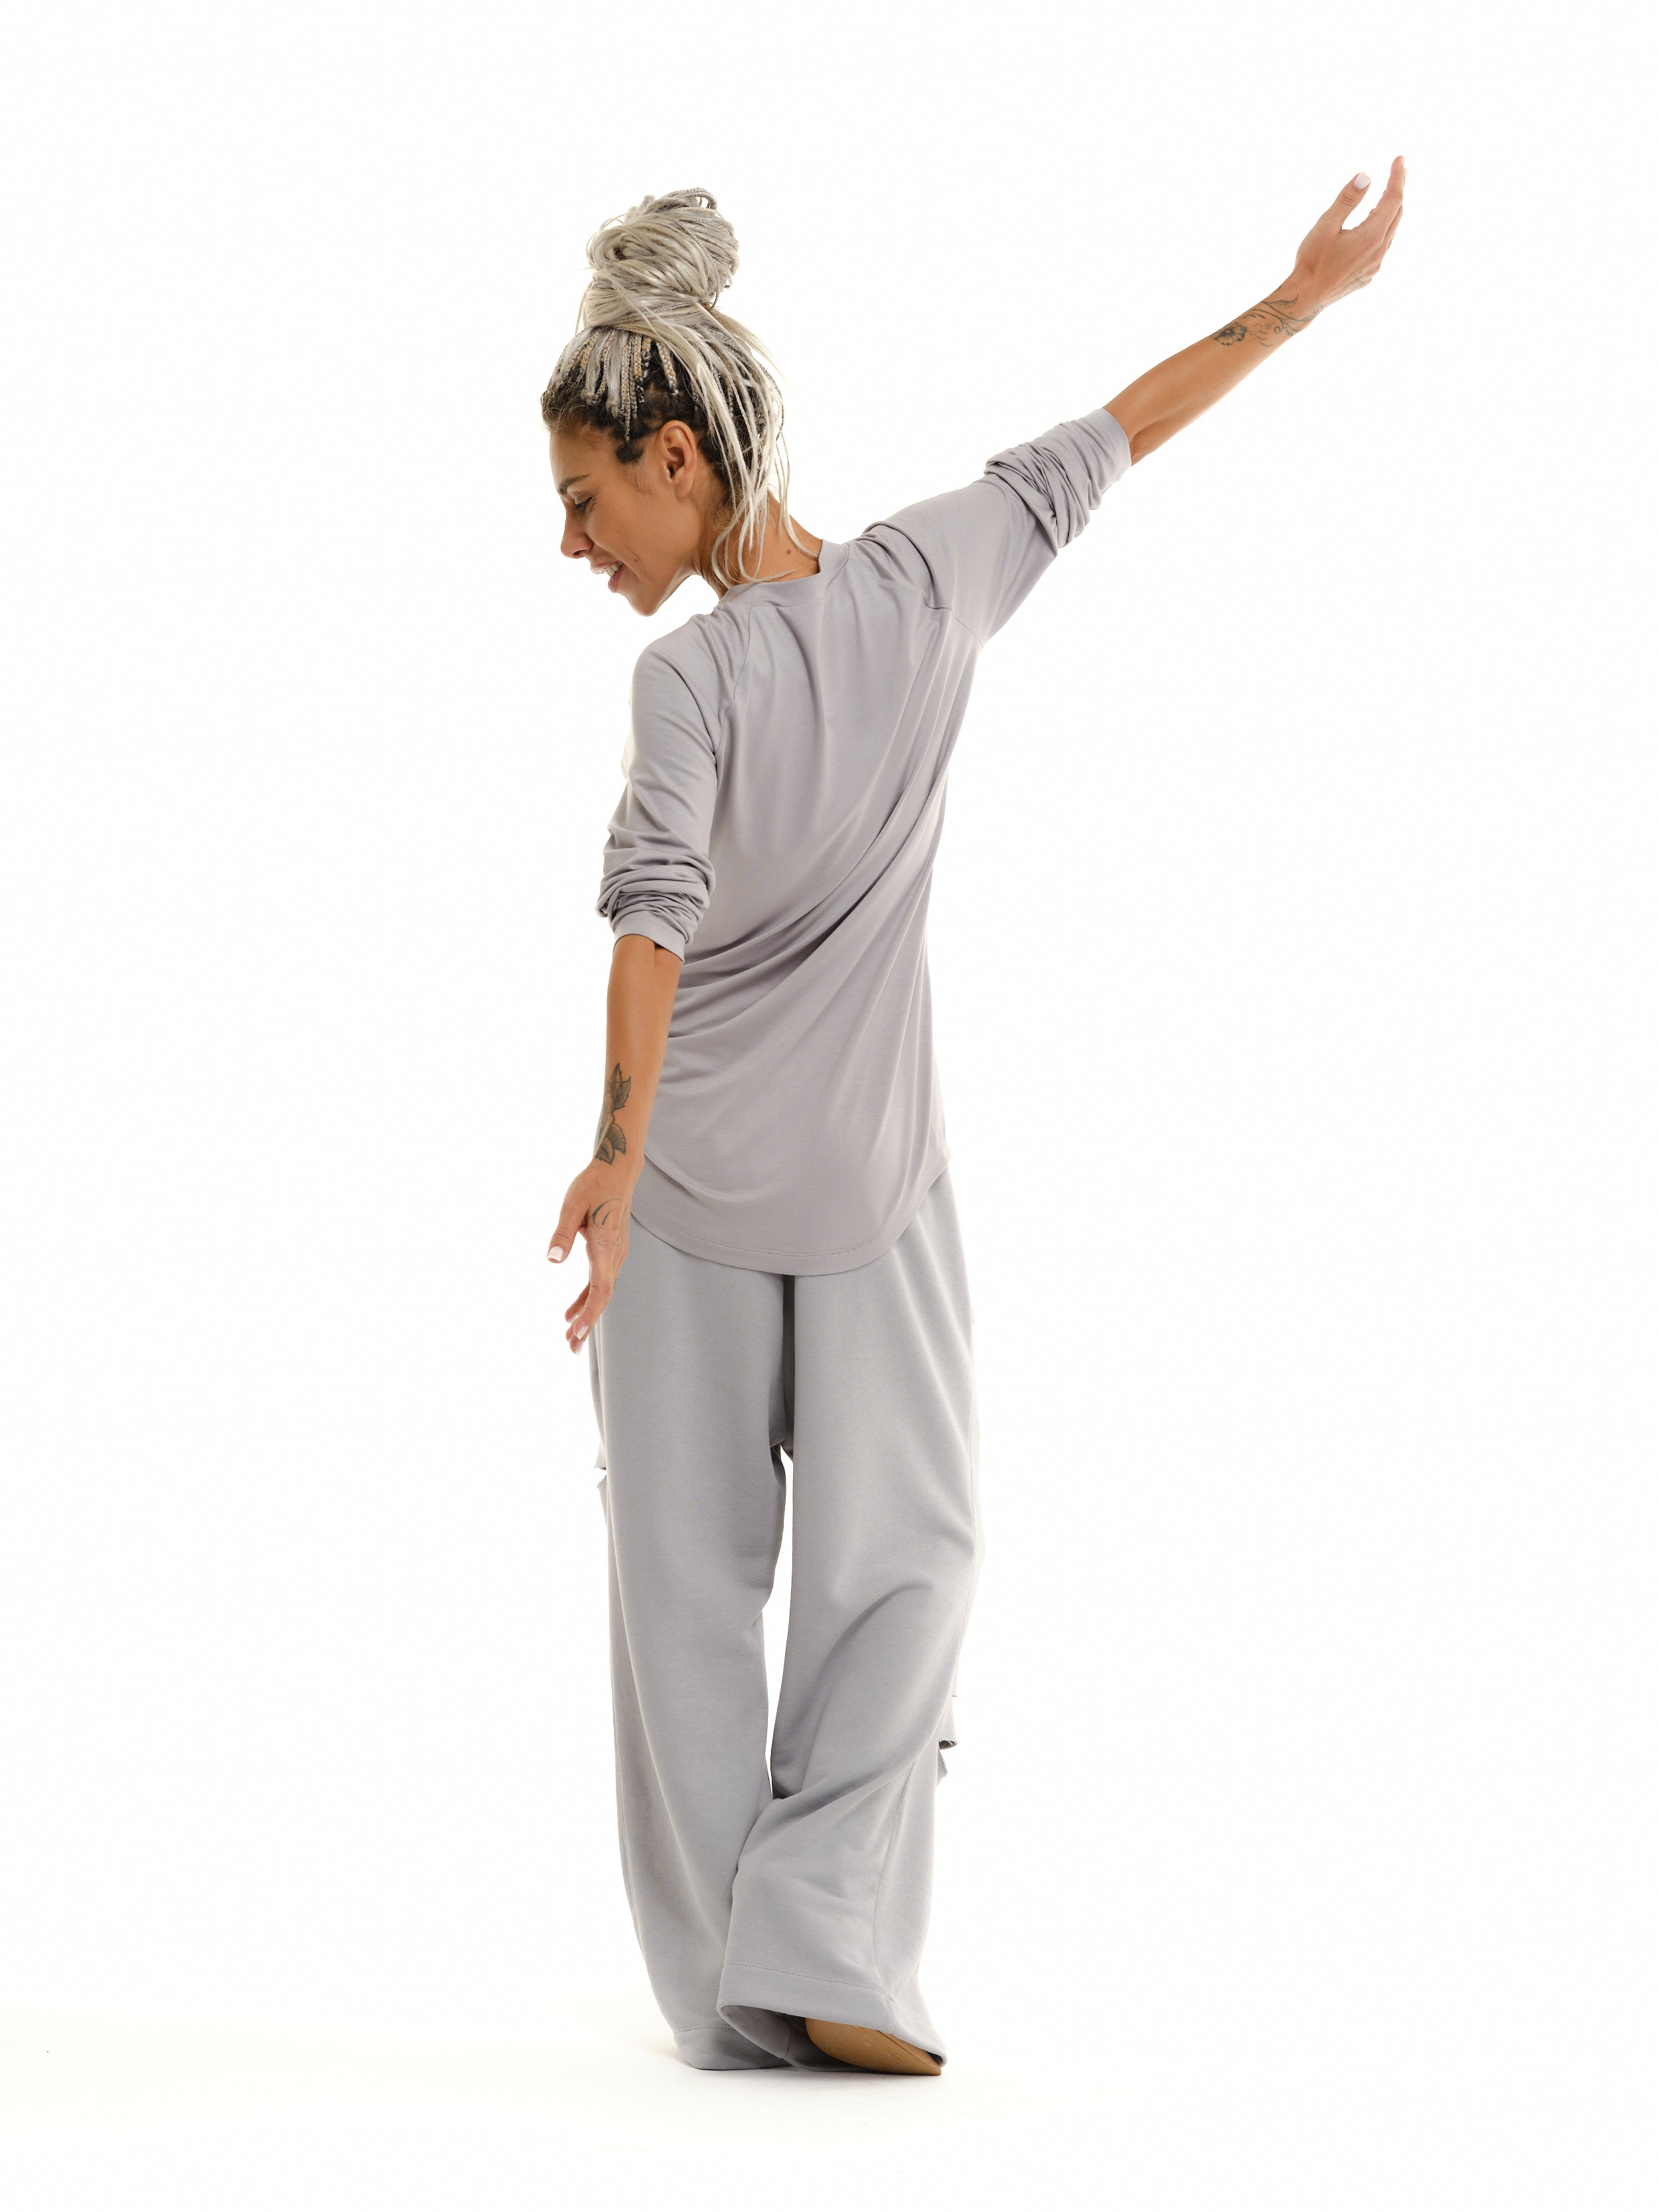 Grey Ripped Sweatsuit Set – Clothes By Locker Room